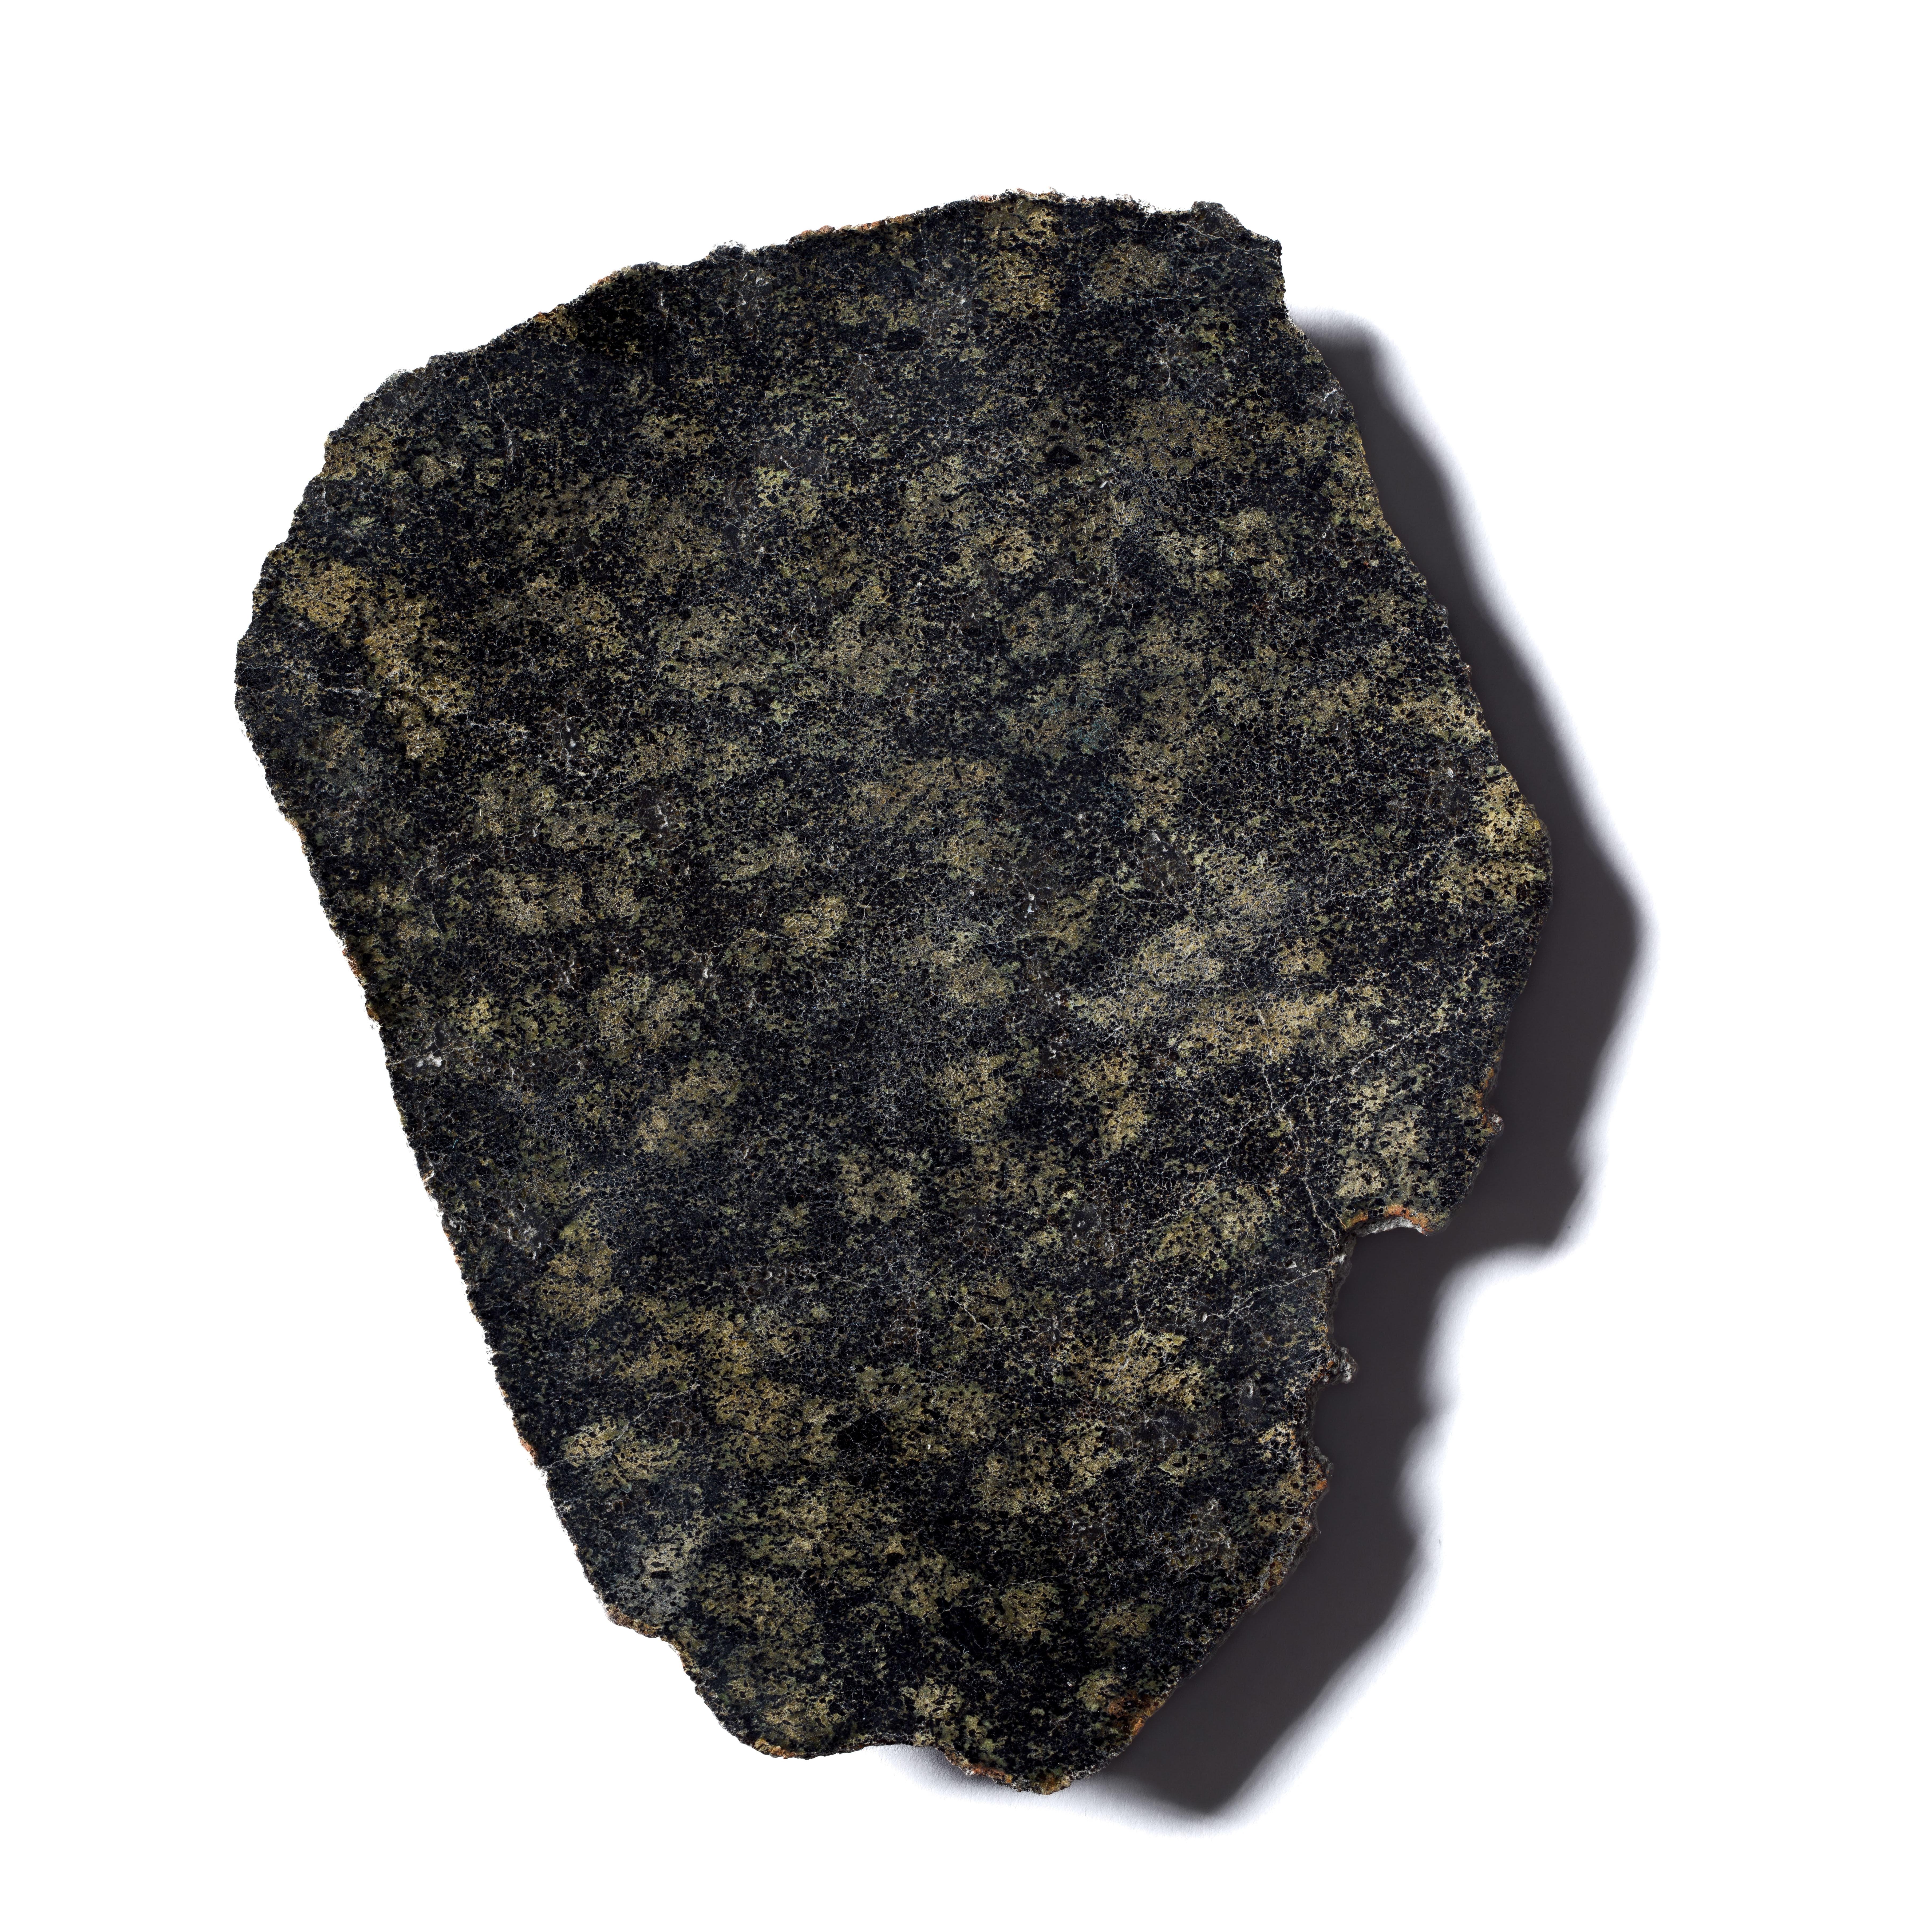 MARTIAN STONE - NWA 14713 
Lherzolitic shergottite 
127 g 

“This 127-gram fragment of the NWA 14713 meteorite displays a green-black mottled exterior. The rock is a martian shergottite (a basalt) composed mainly of coarse grains of pyroxene as well